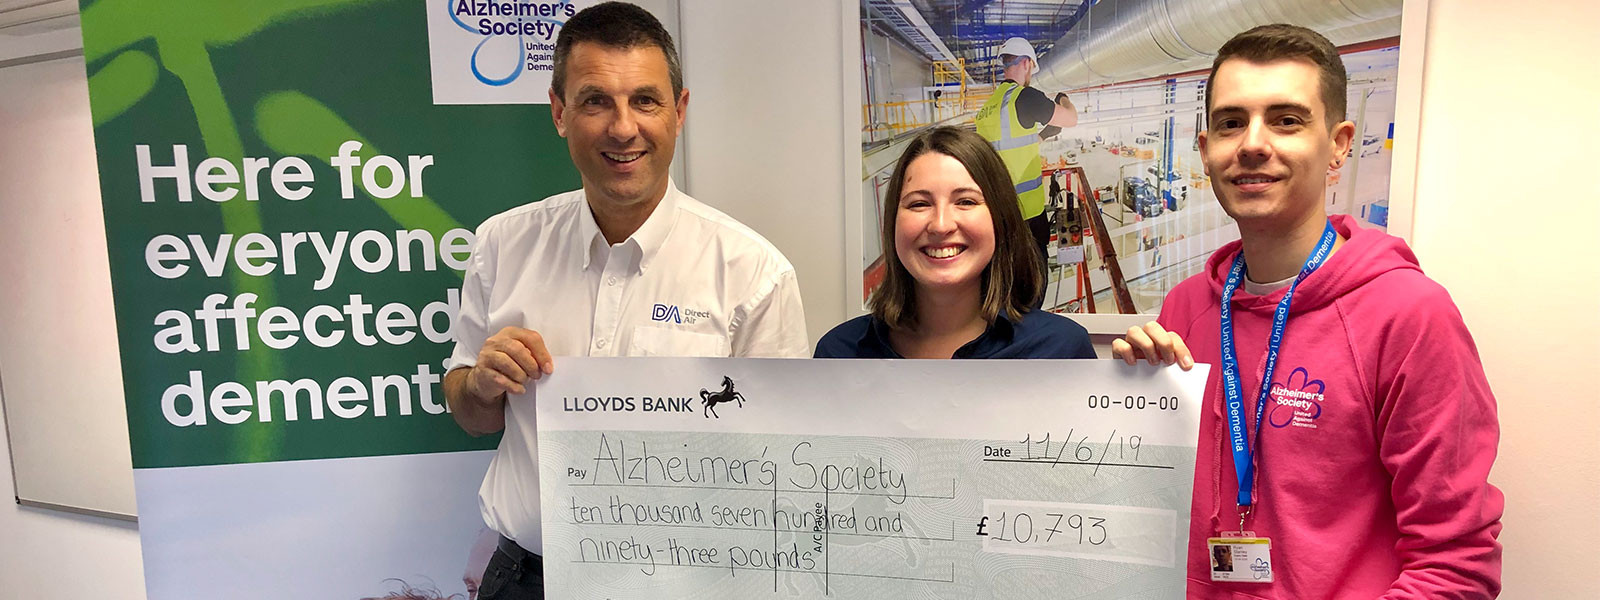 Direct Air fundraising for Alzheimer's Society reaches over £10,000